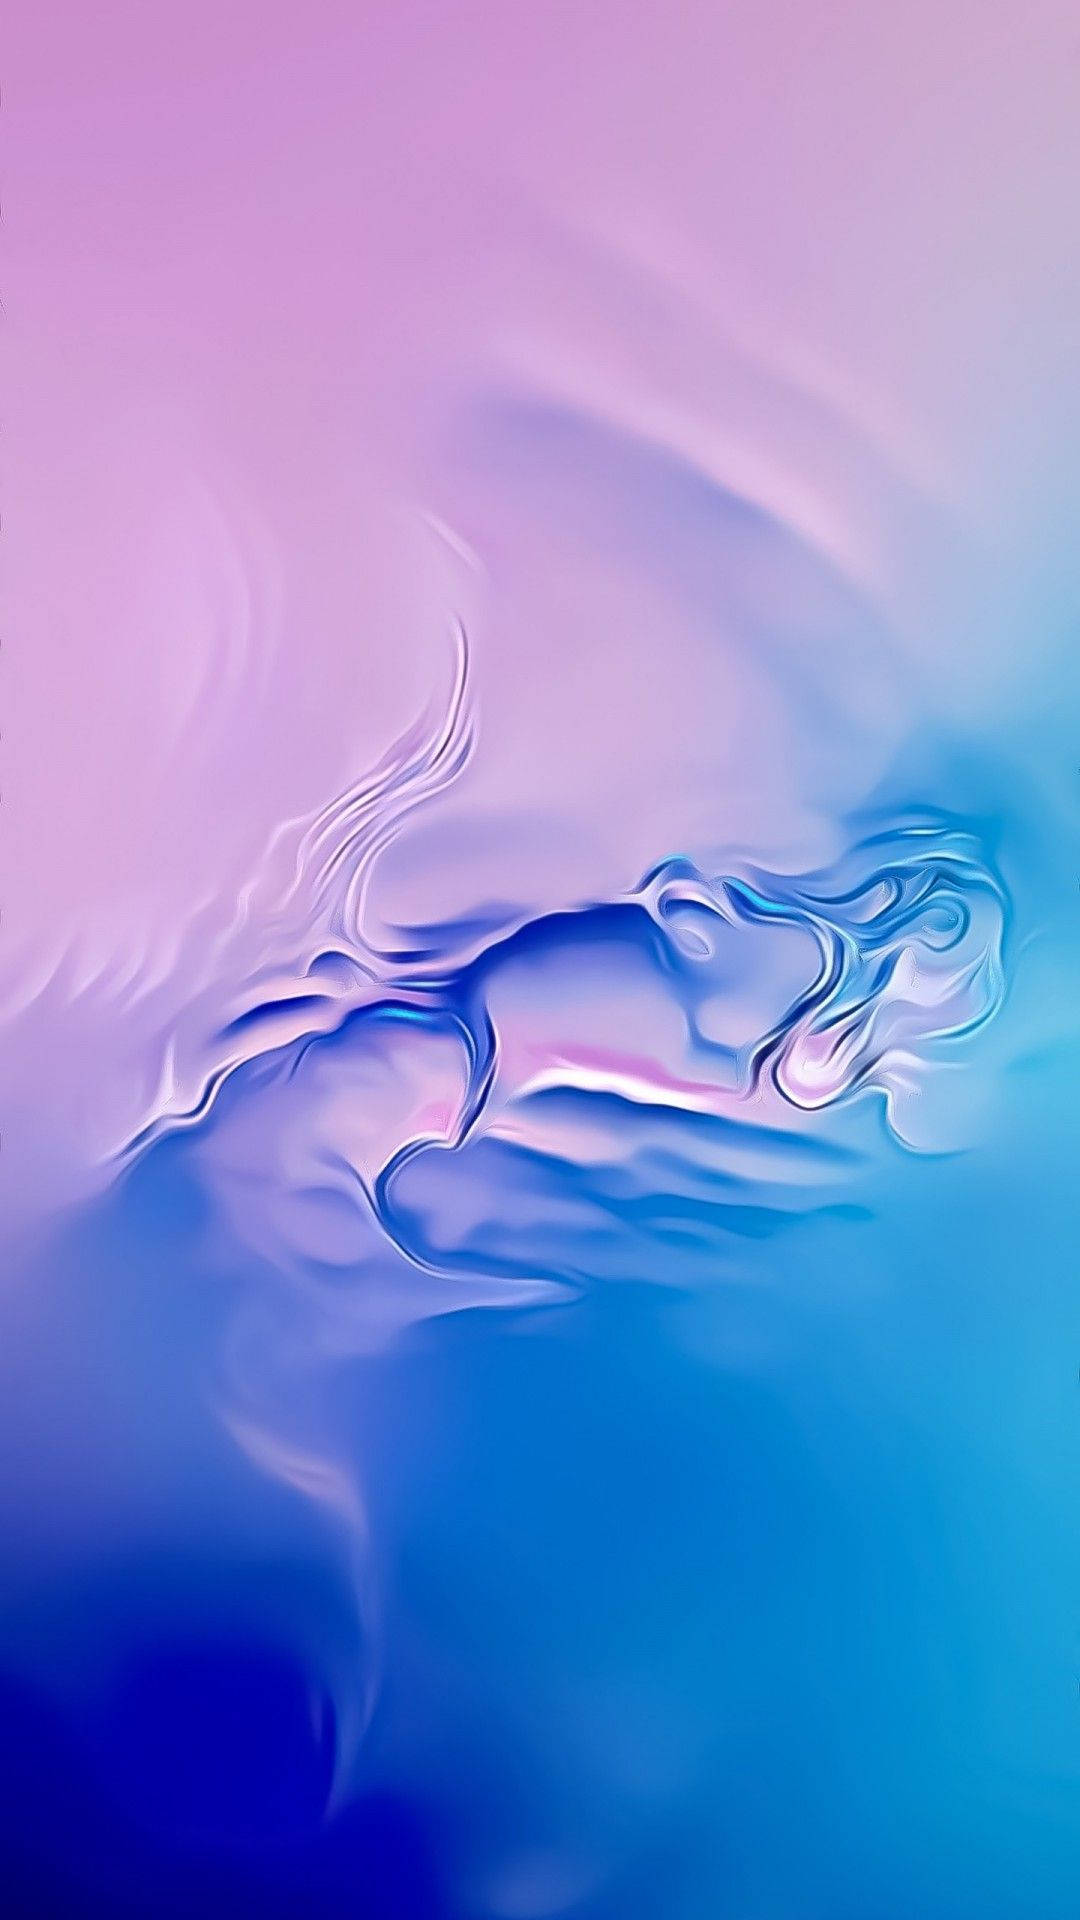 A mysterious and dreamy world of distorted water and light. Wallpaper